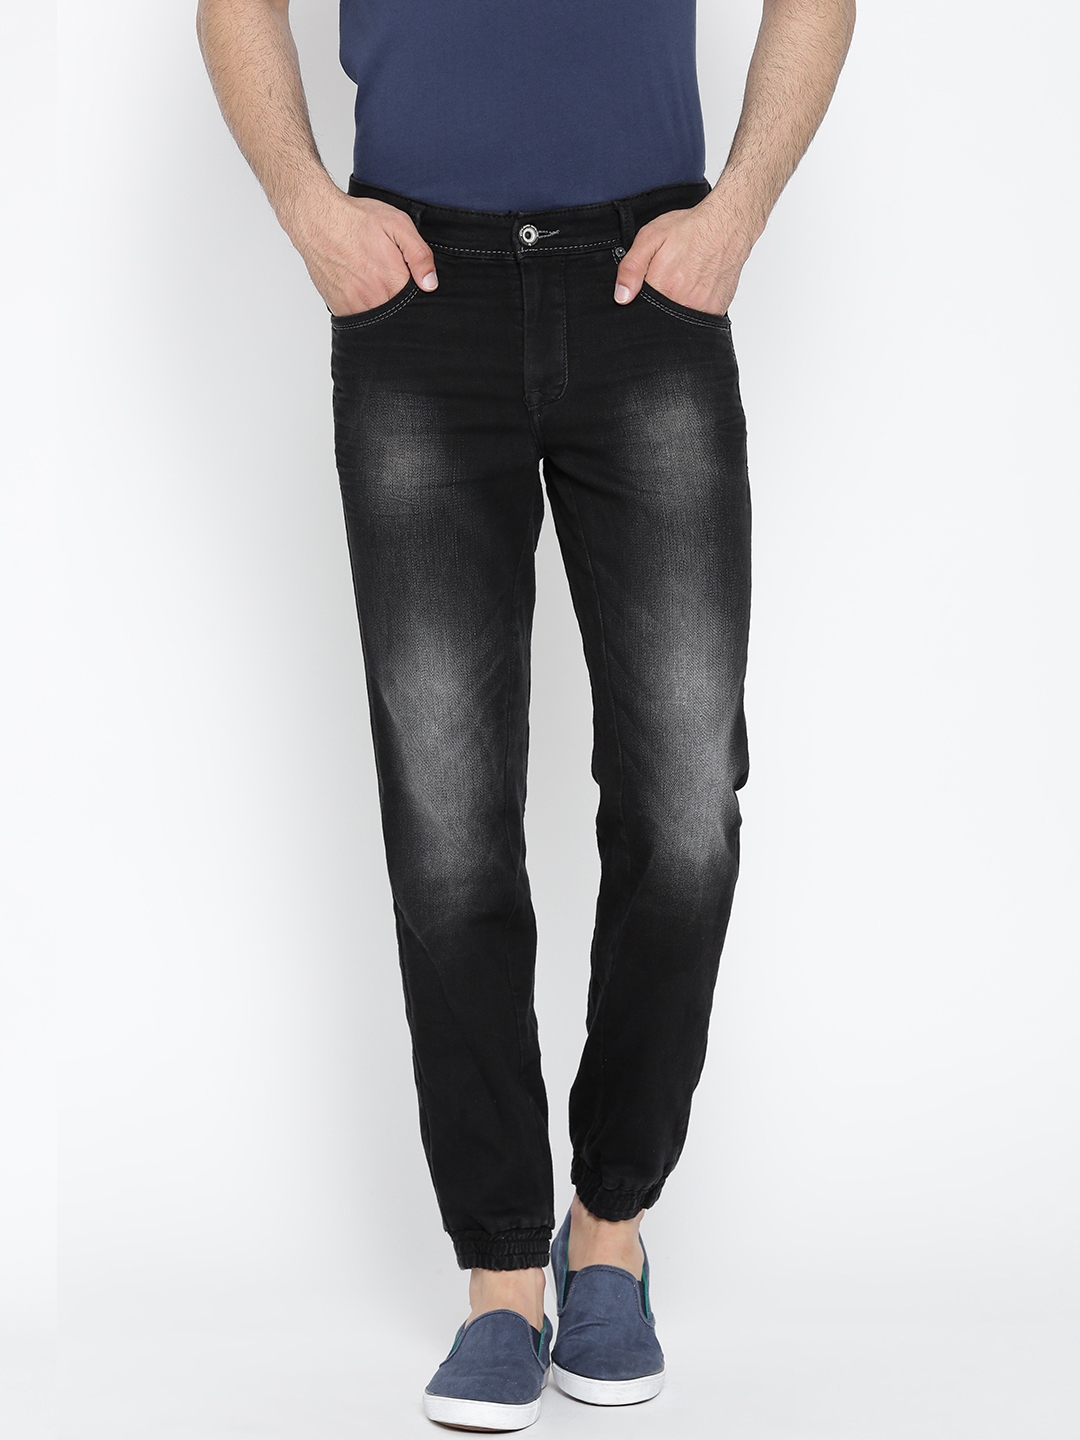 Buy Mufti Black Cuffed Stretchable Jeans - Jeans for Men 1435340 | Myntra